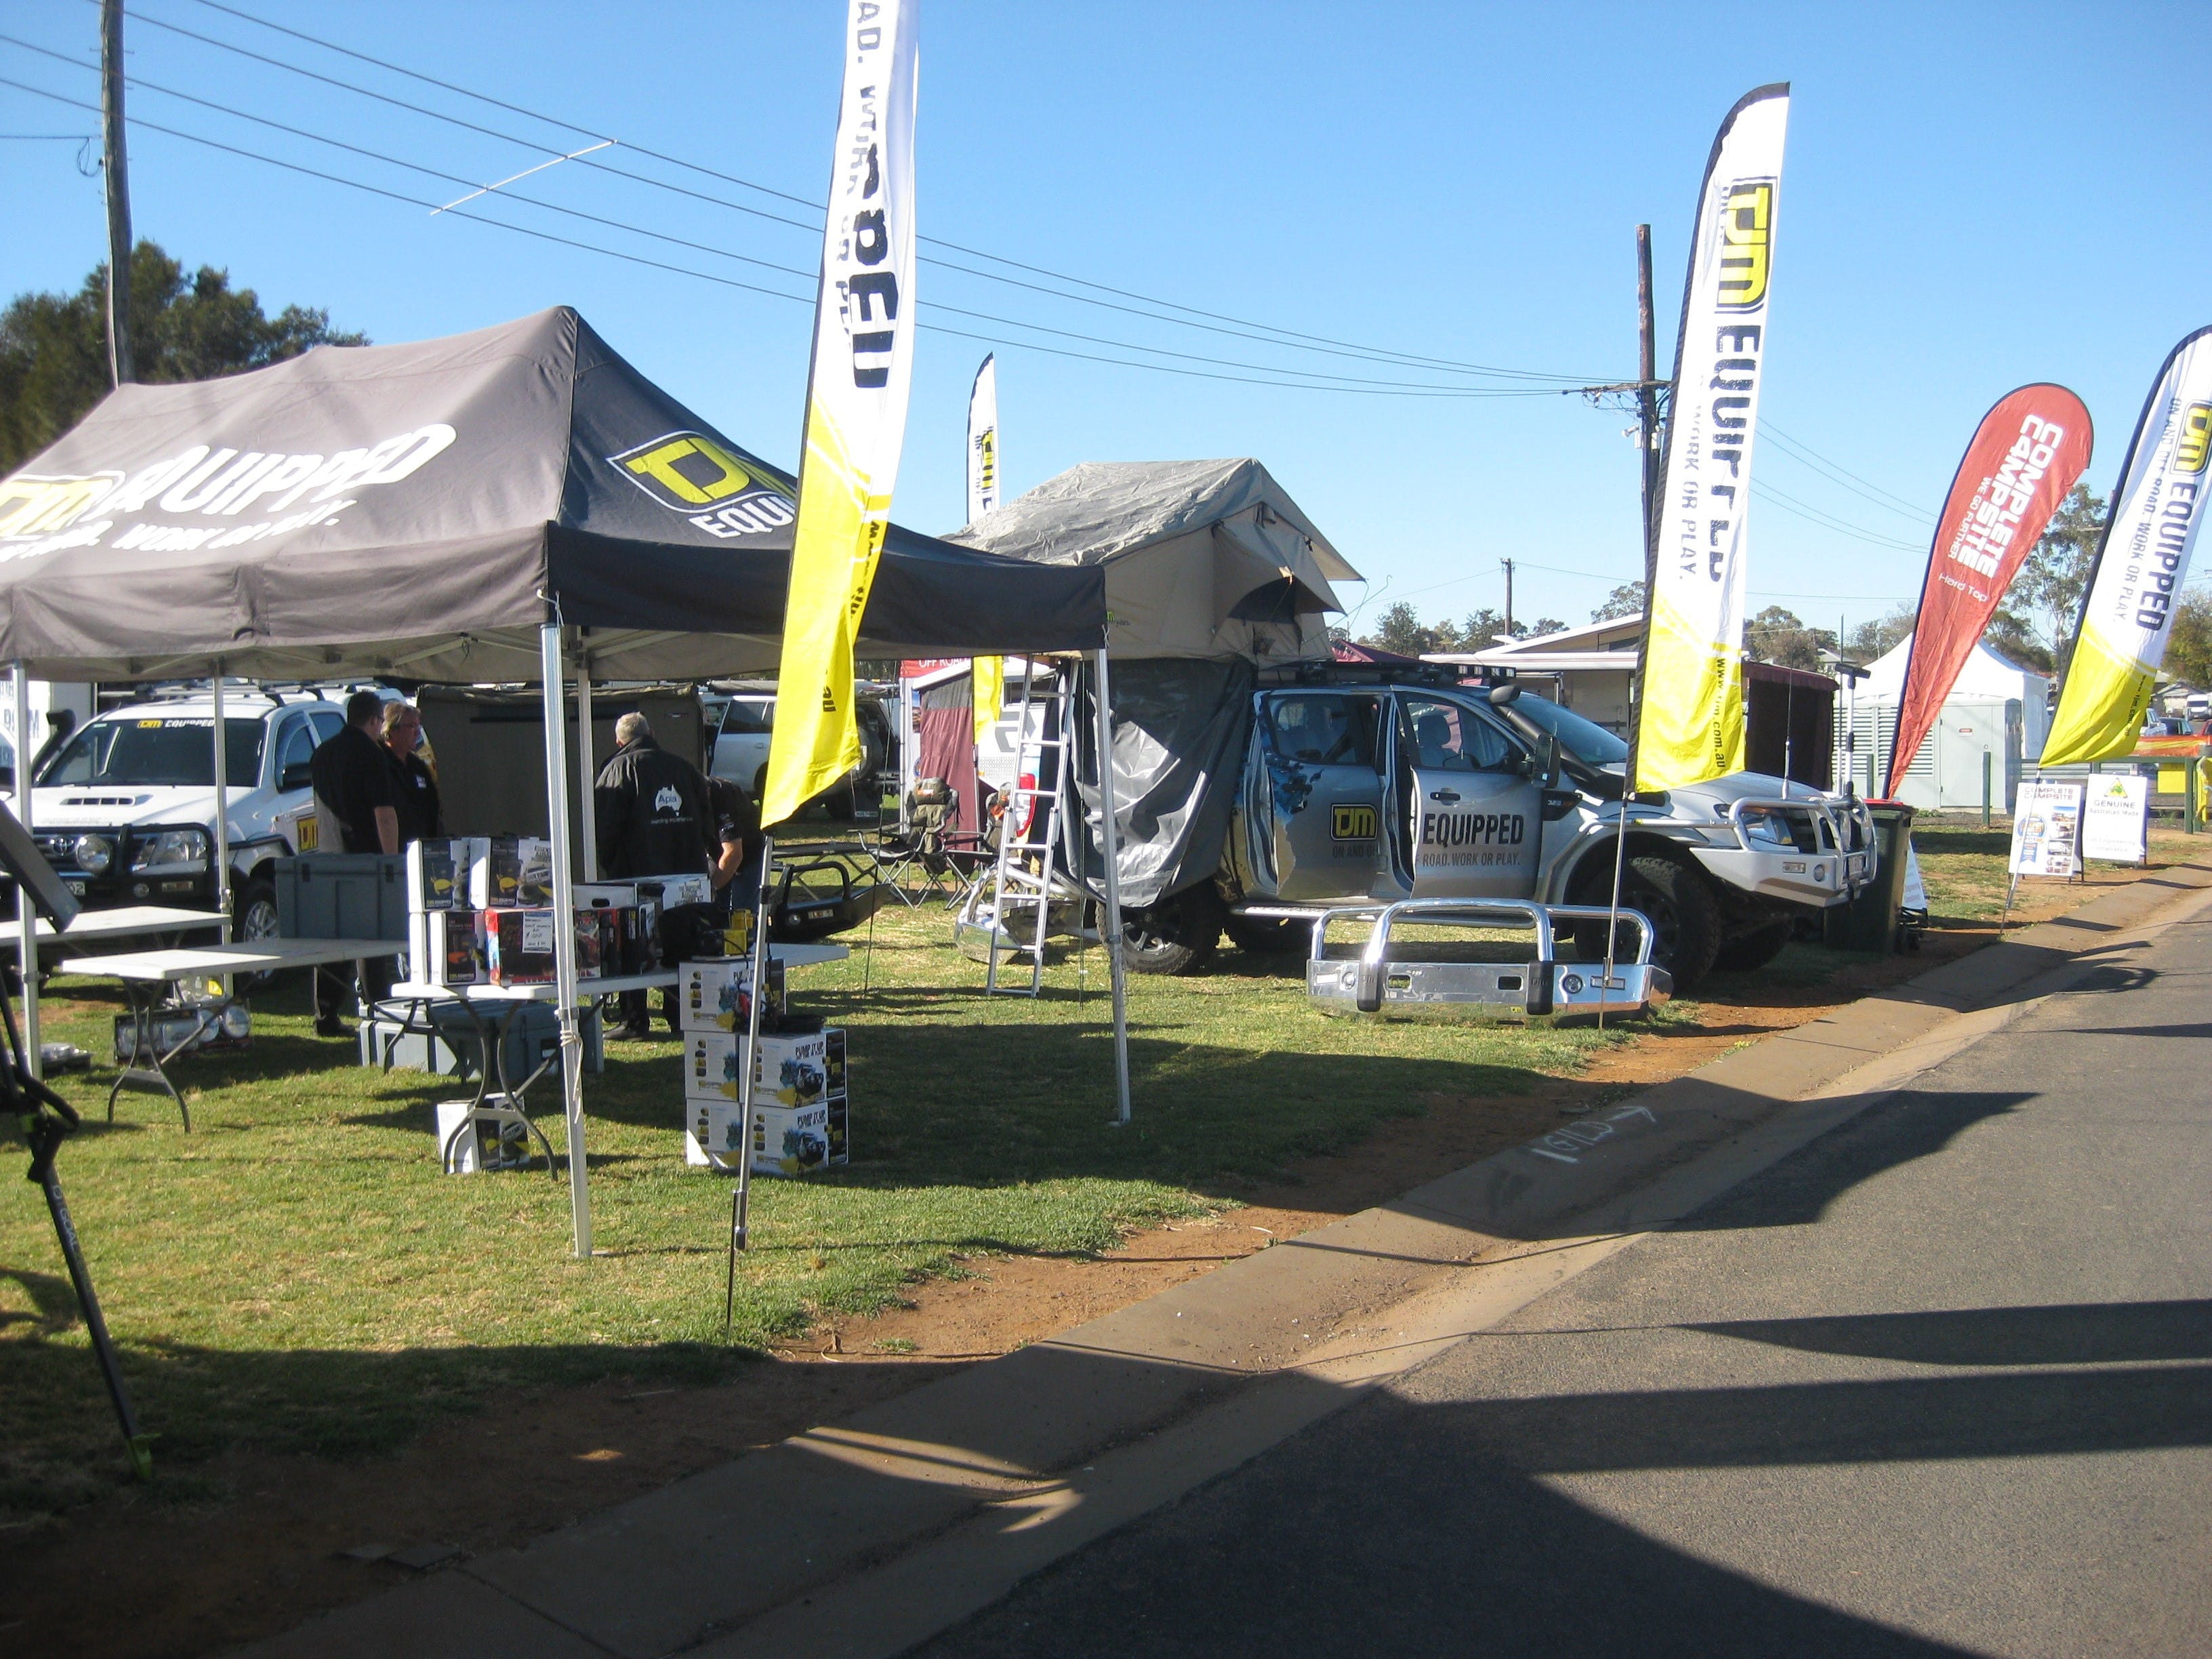 Orana Caravan Camping 4WD Fish and Boat Show - Tourism Canberra